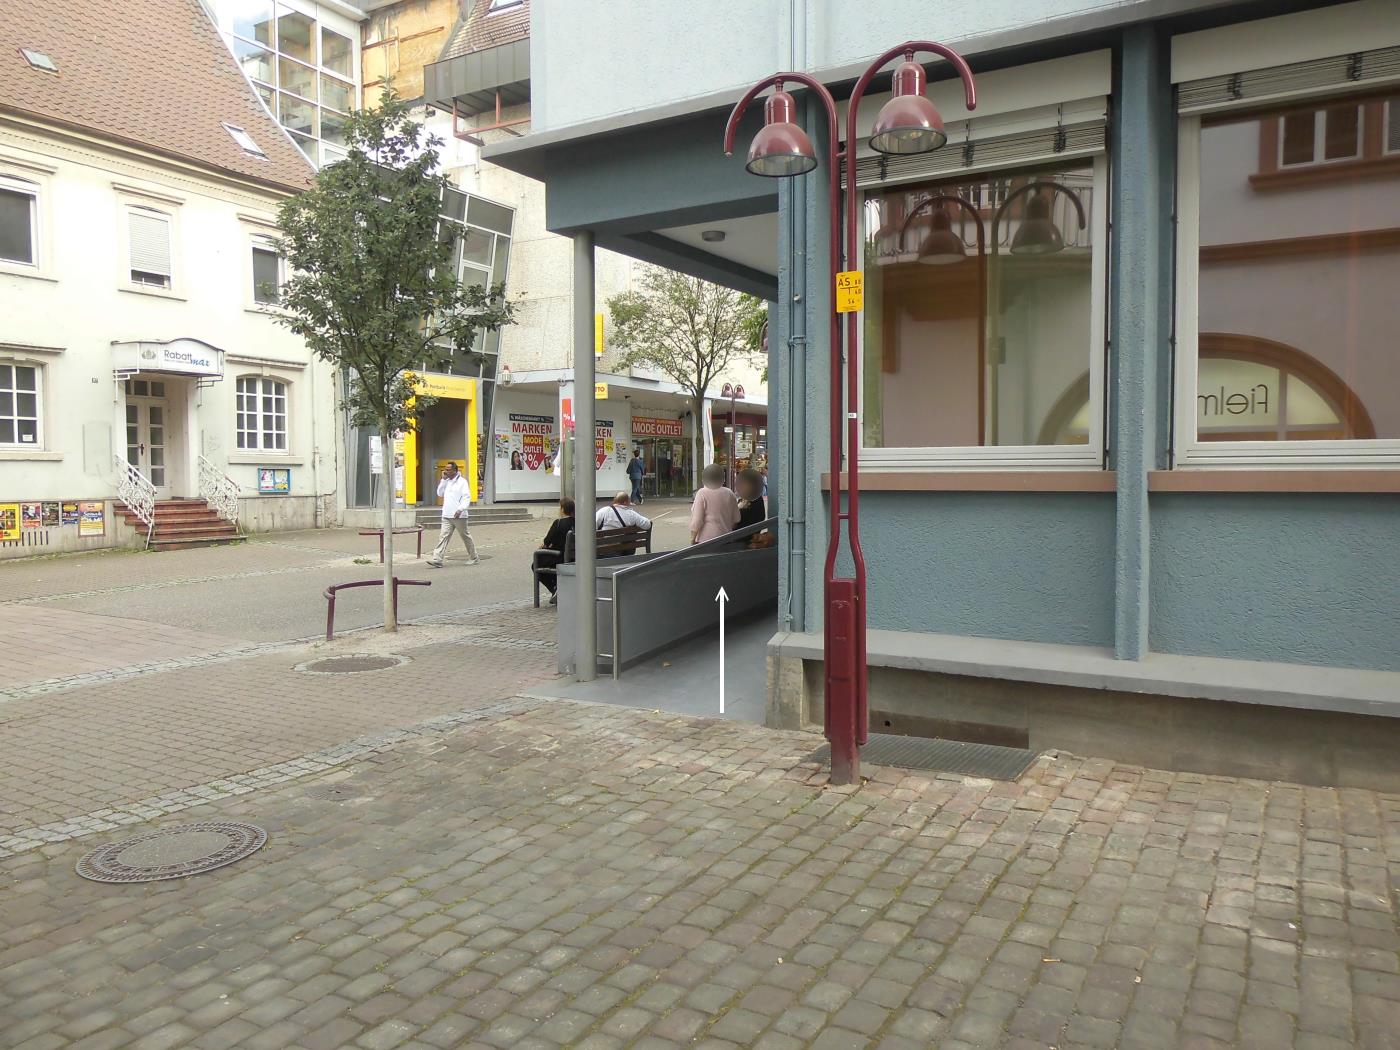 Wiesloch: Jehovah's Witnesses popular and exposed